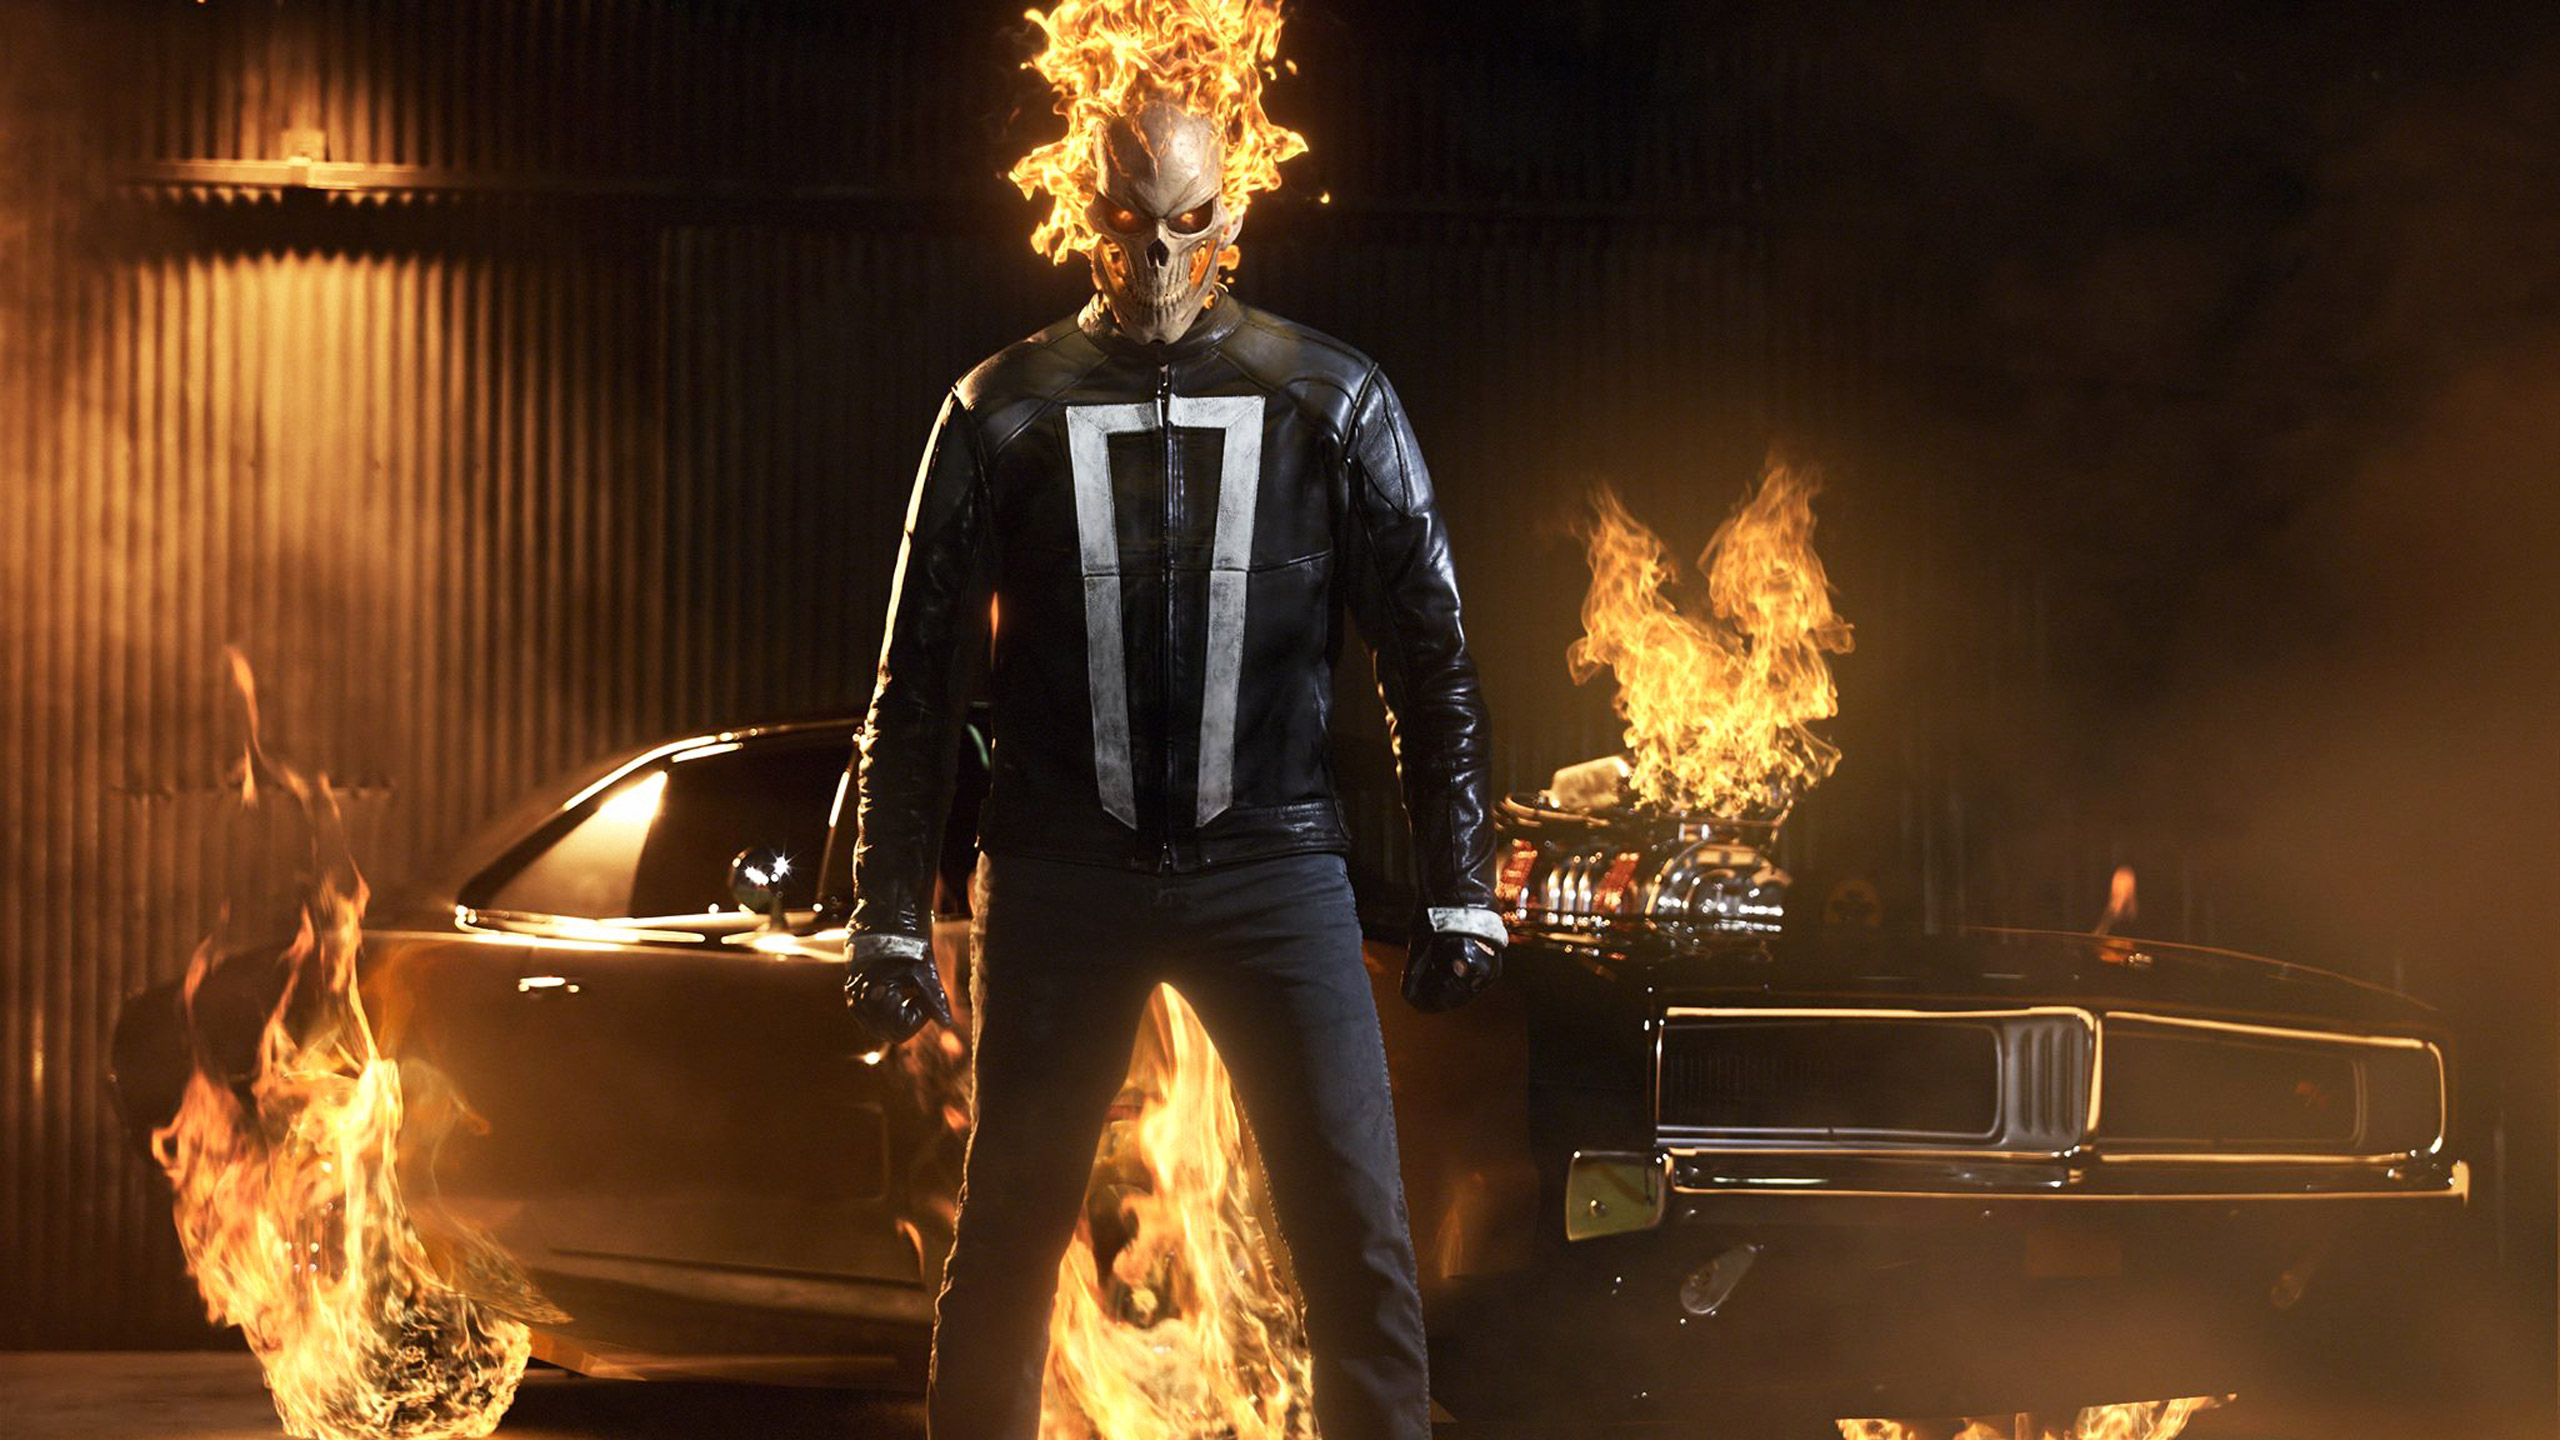 Ghost Rider Wallpapers